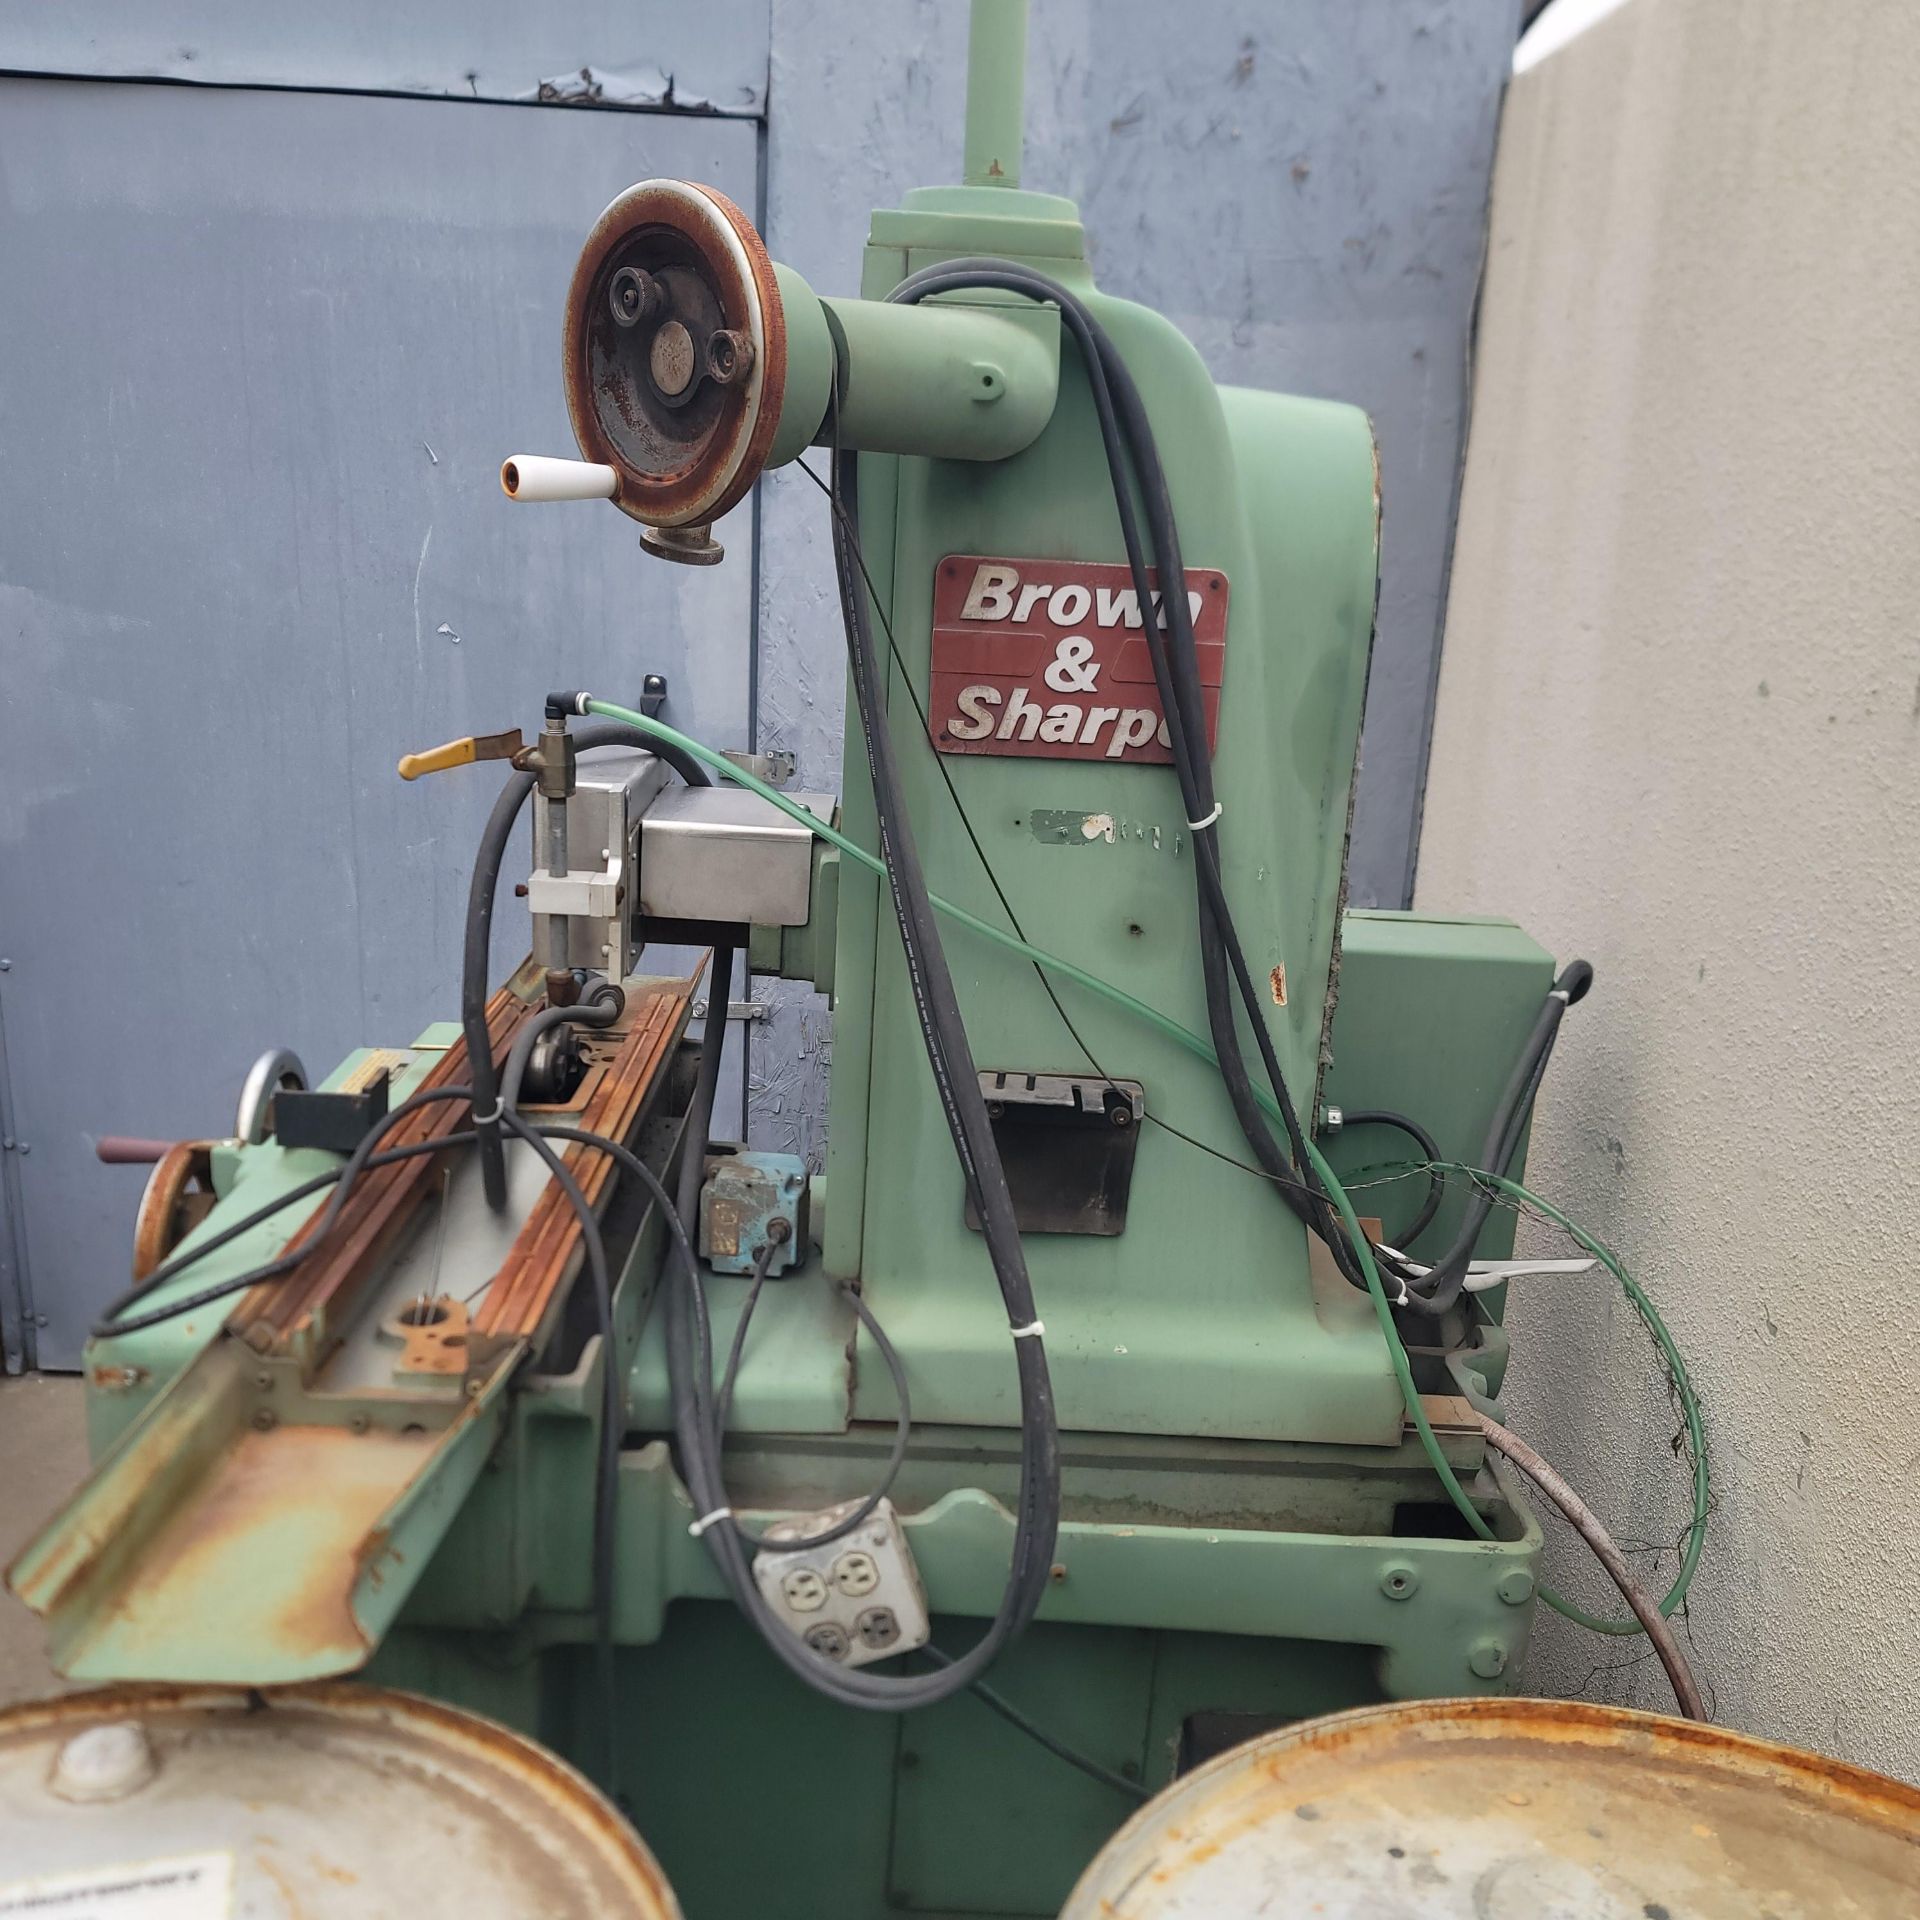 BROWN & SHARPE SURFACE GRINDER, NO MAGNETIC CHUCK, S/N 523-6180-1290, FACTORY REBUILT IN 1991, PARTS - Image 4 of 5